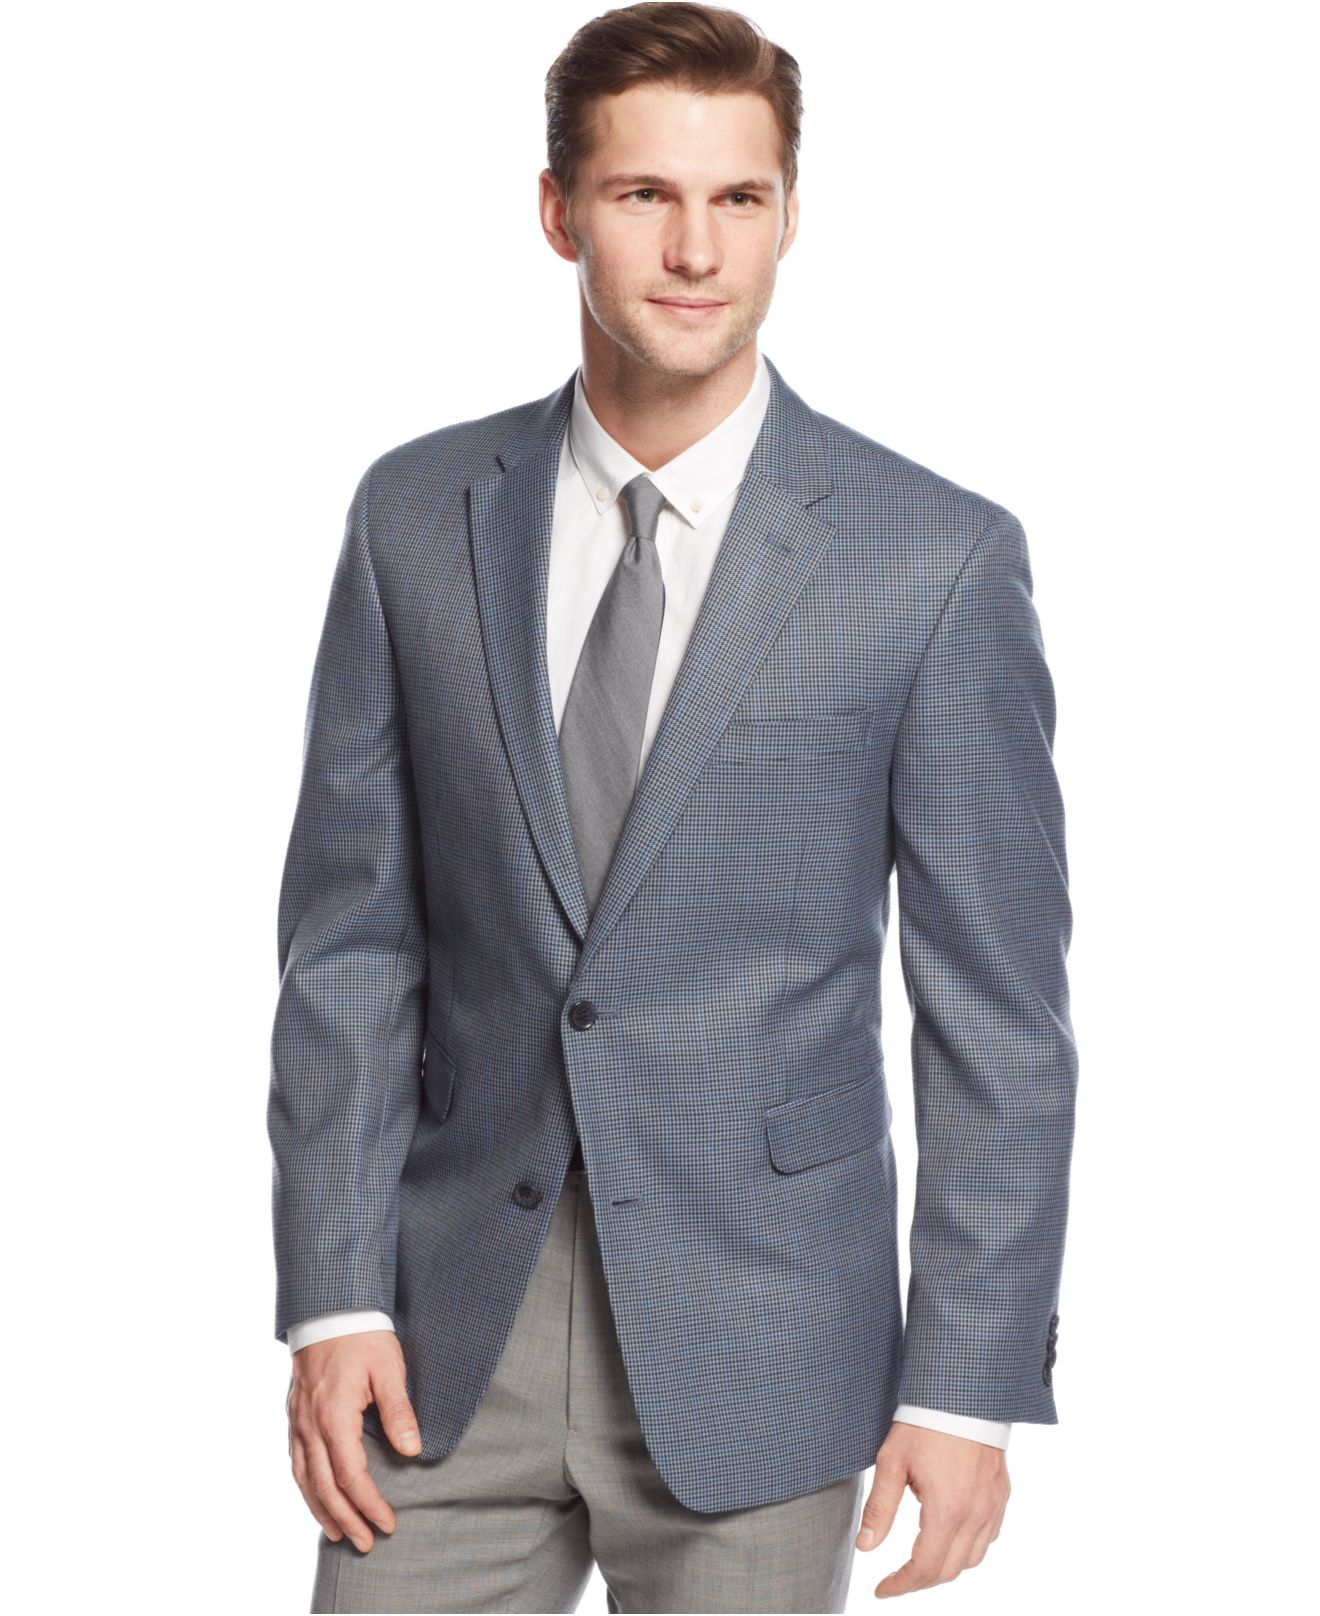 Lyst - Tommy Hilfiger Trim-fit Houndstooth Windowpane Sport Coat in ...